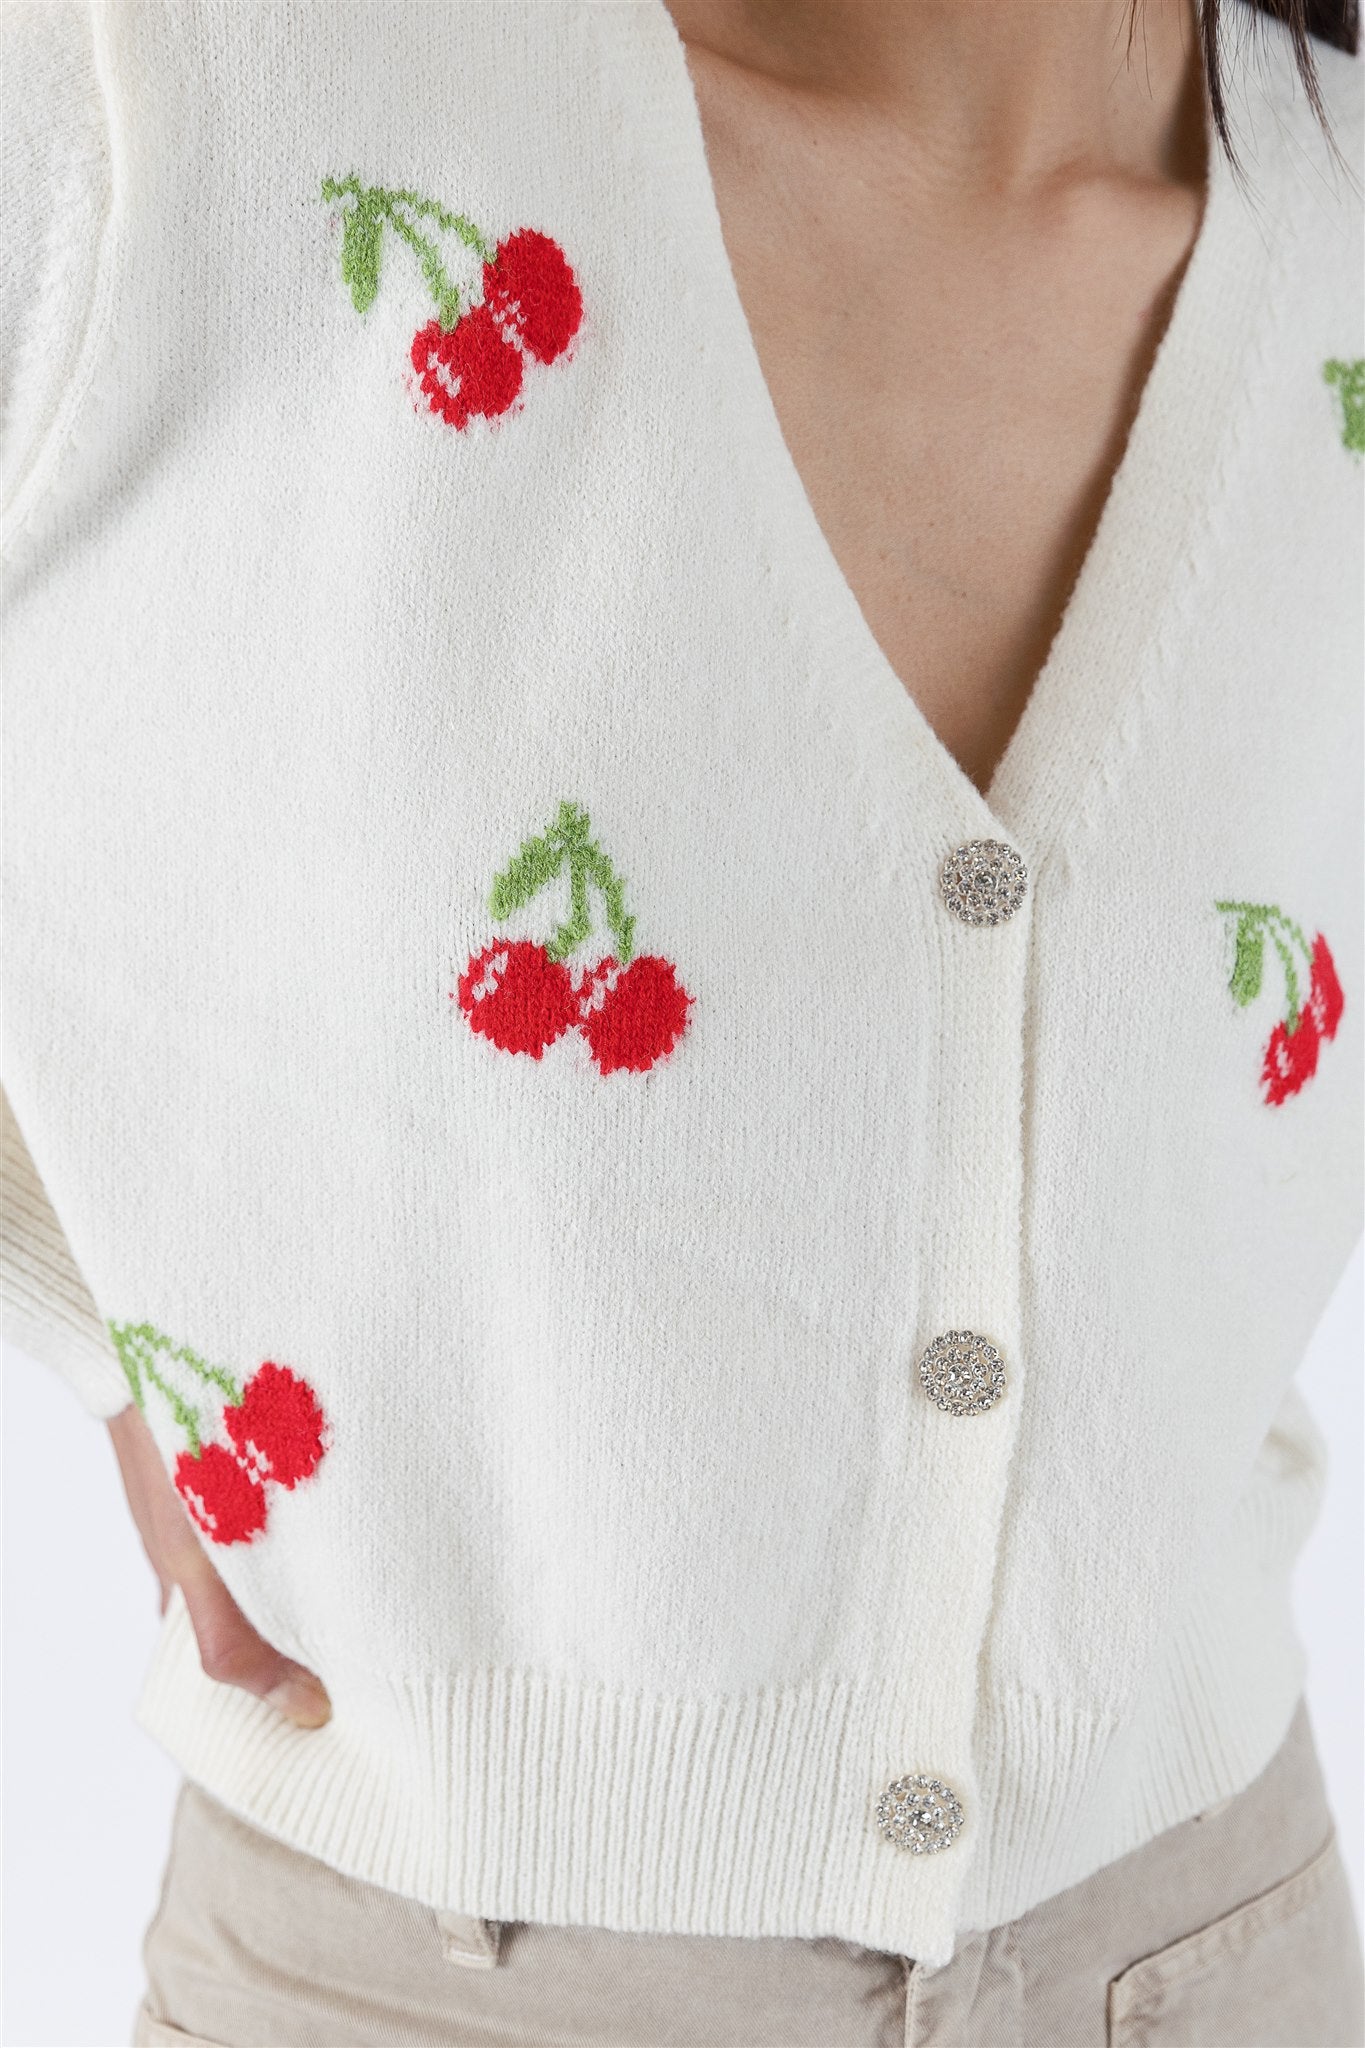 Lyla+Luxe Top - Cherry Print Cardigan - Off White